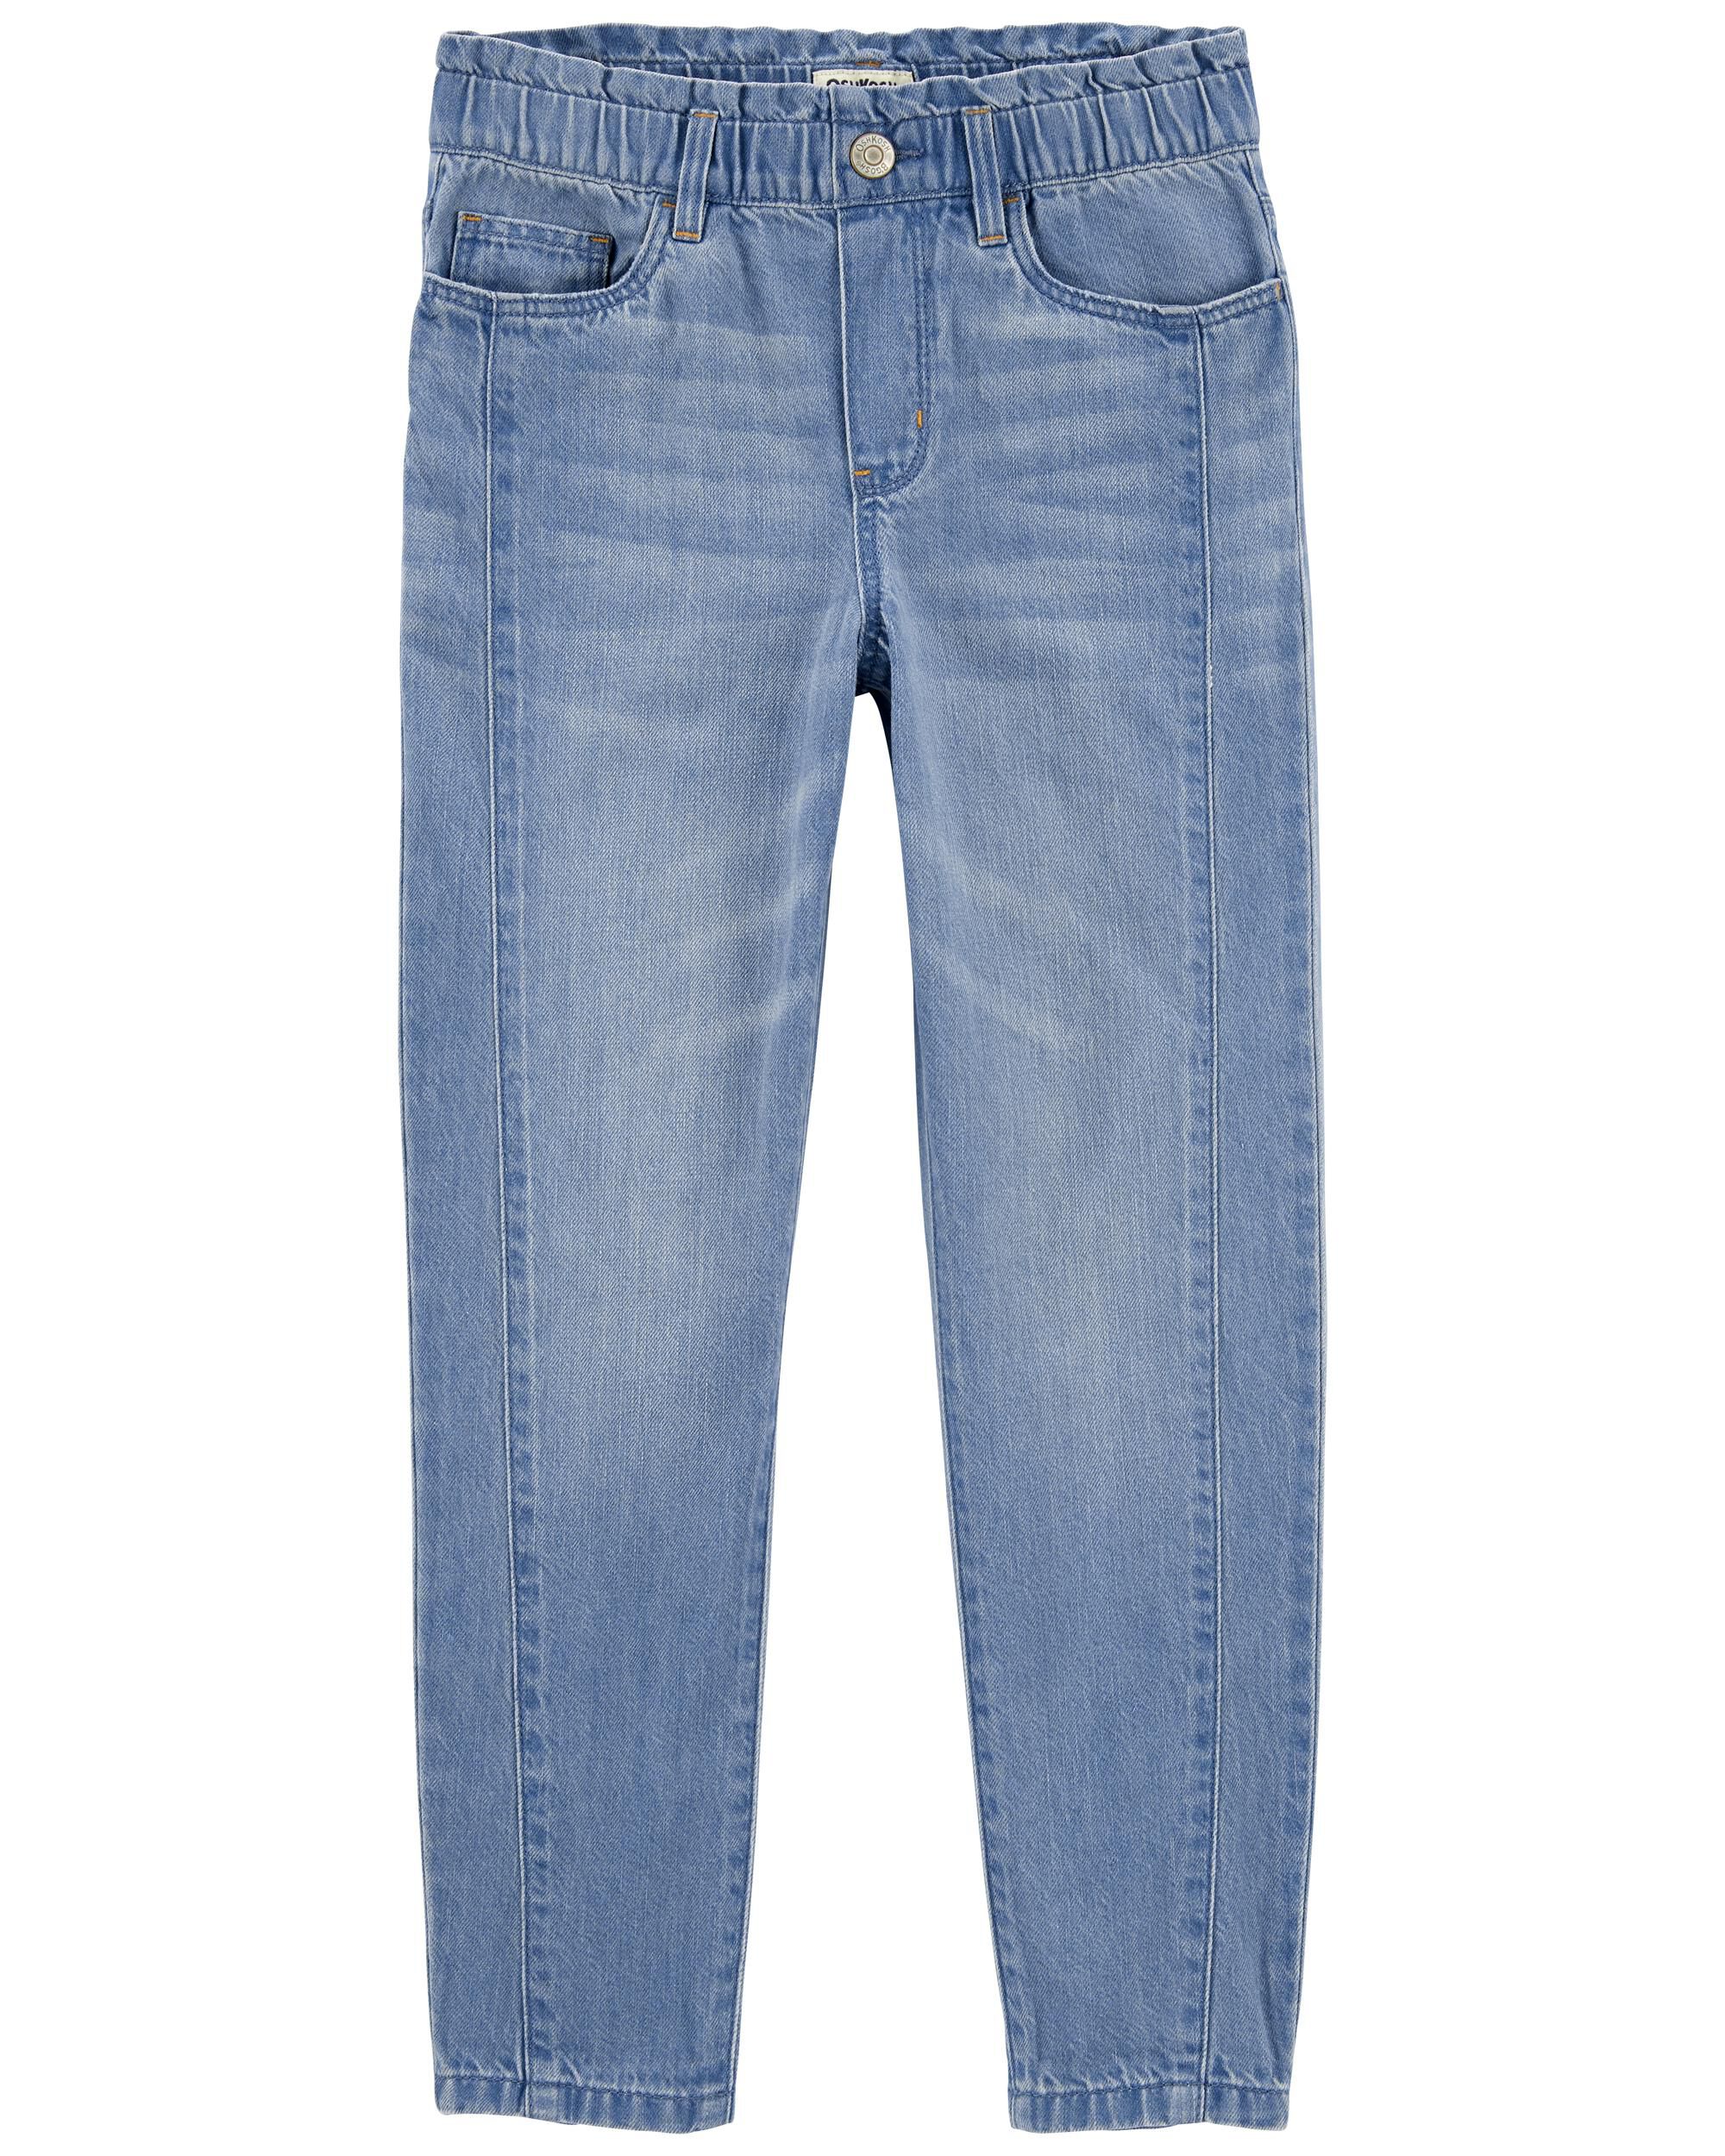 Carters High-Rise Retro Mom Jeans